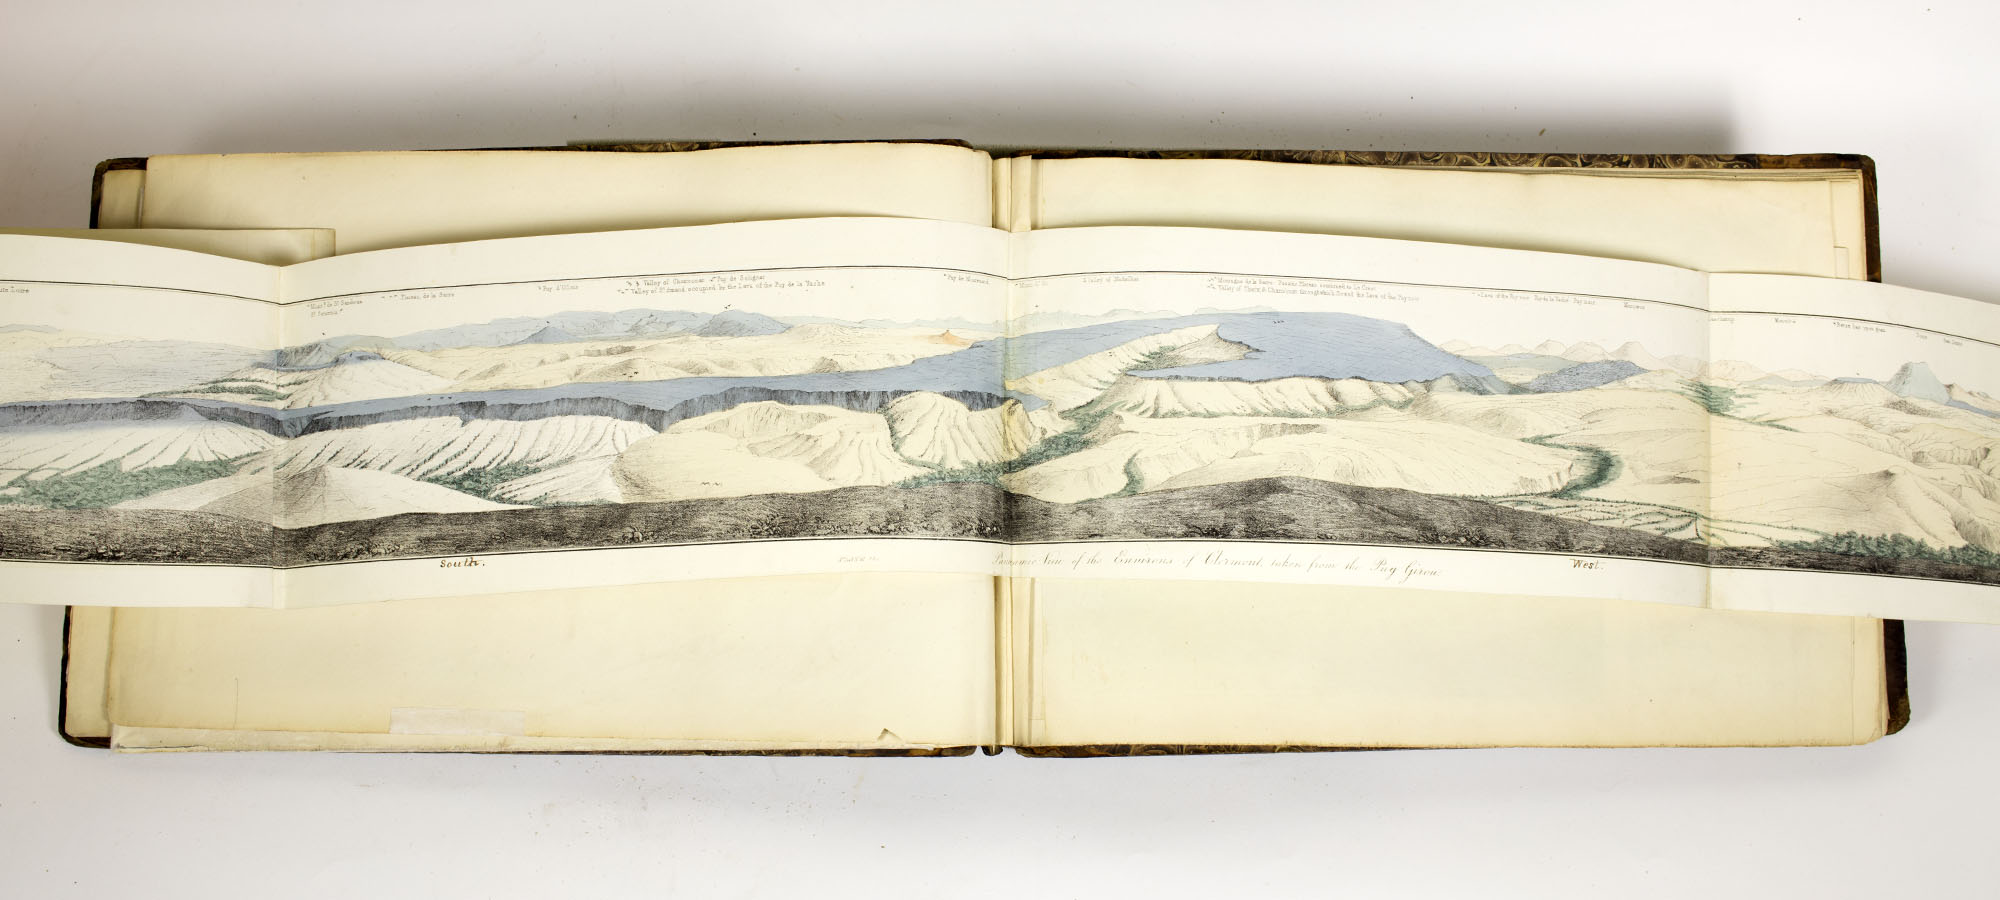 George Poulett Scrope, Memoir on the Geology of Central France (London, 1827).